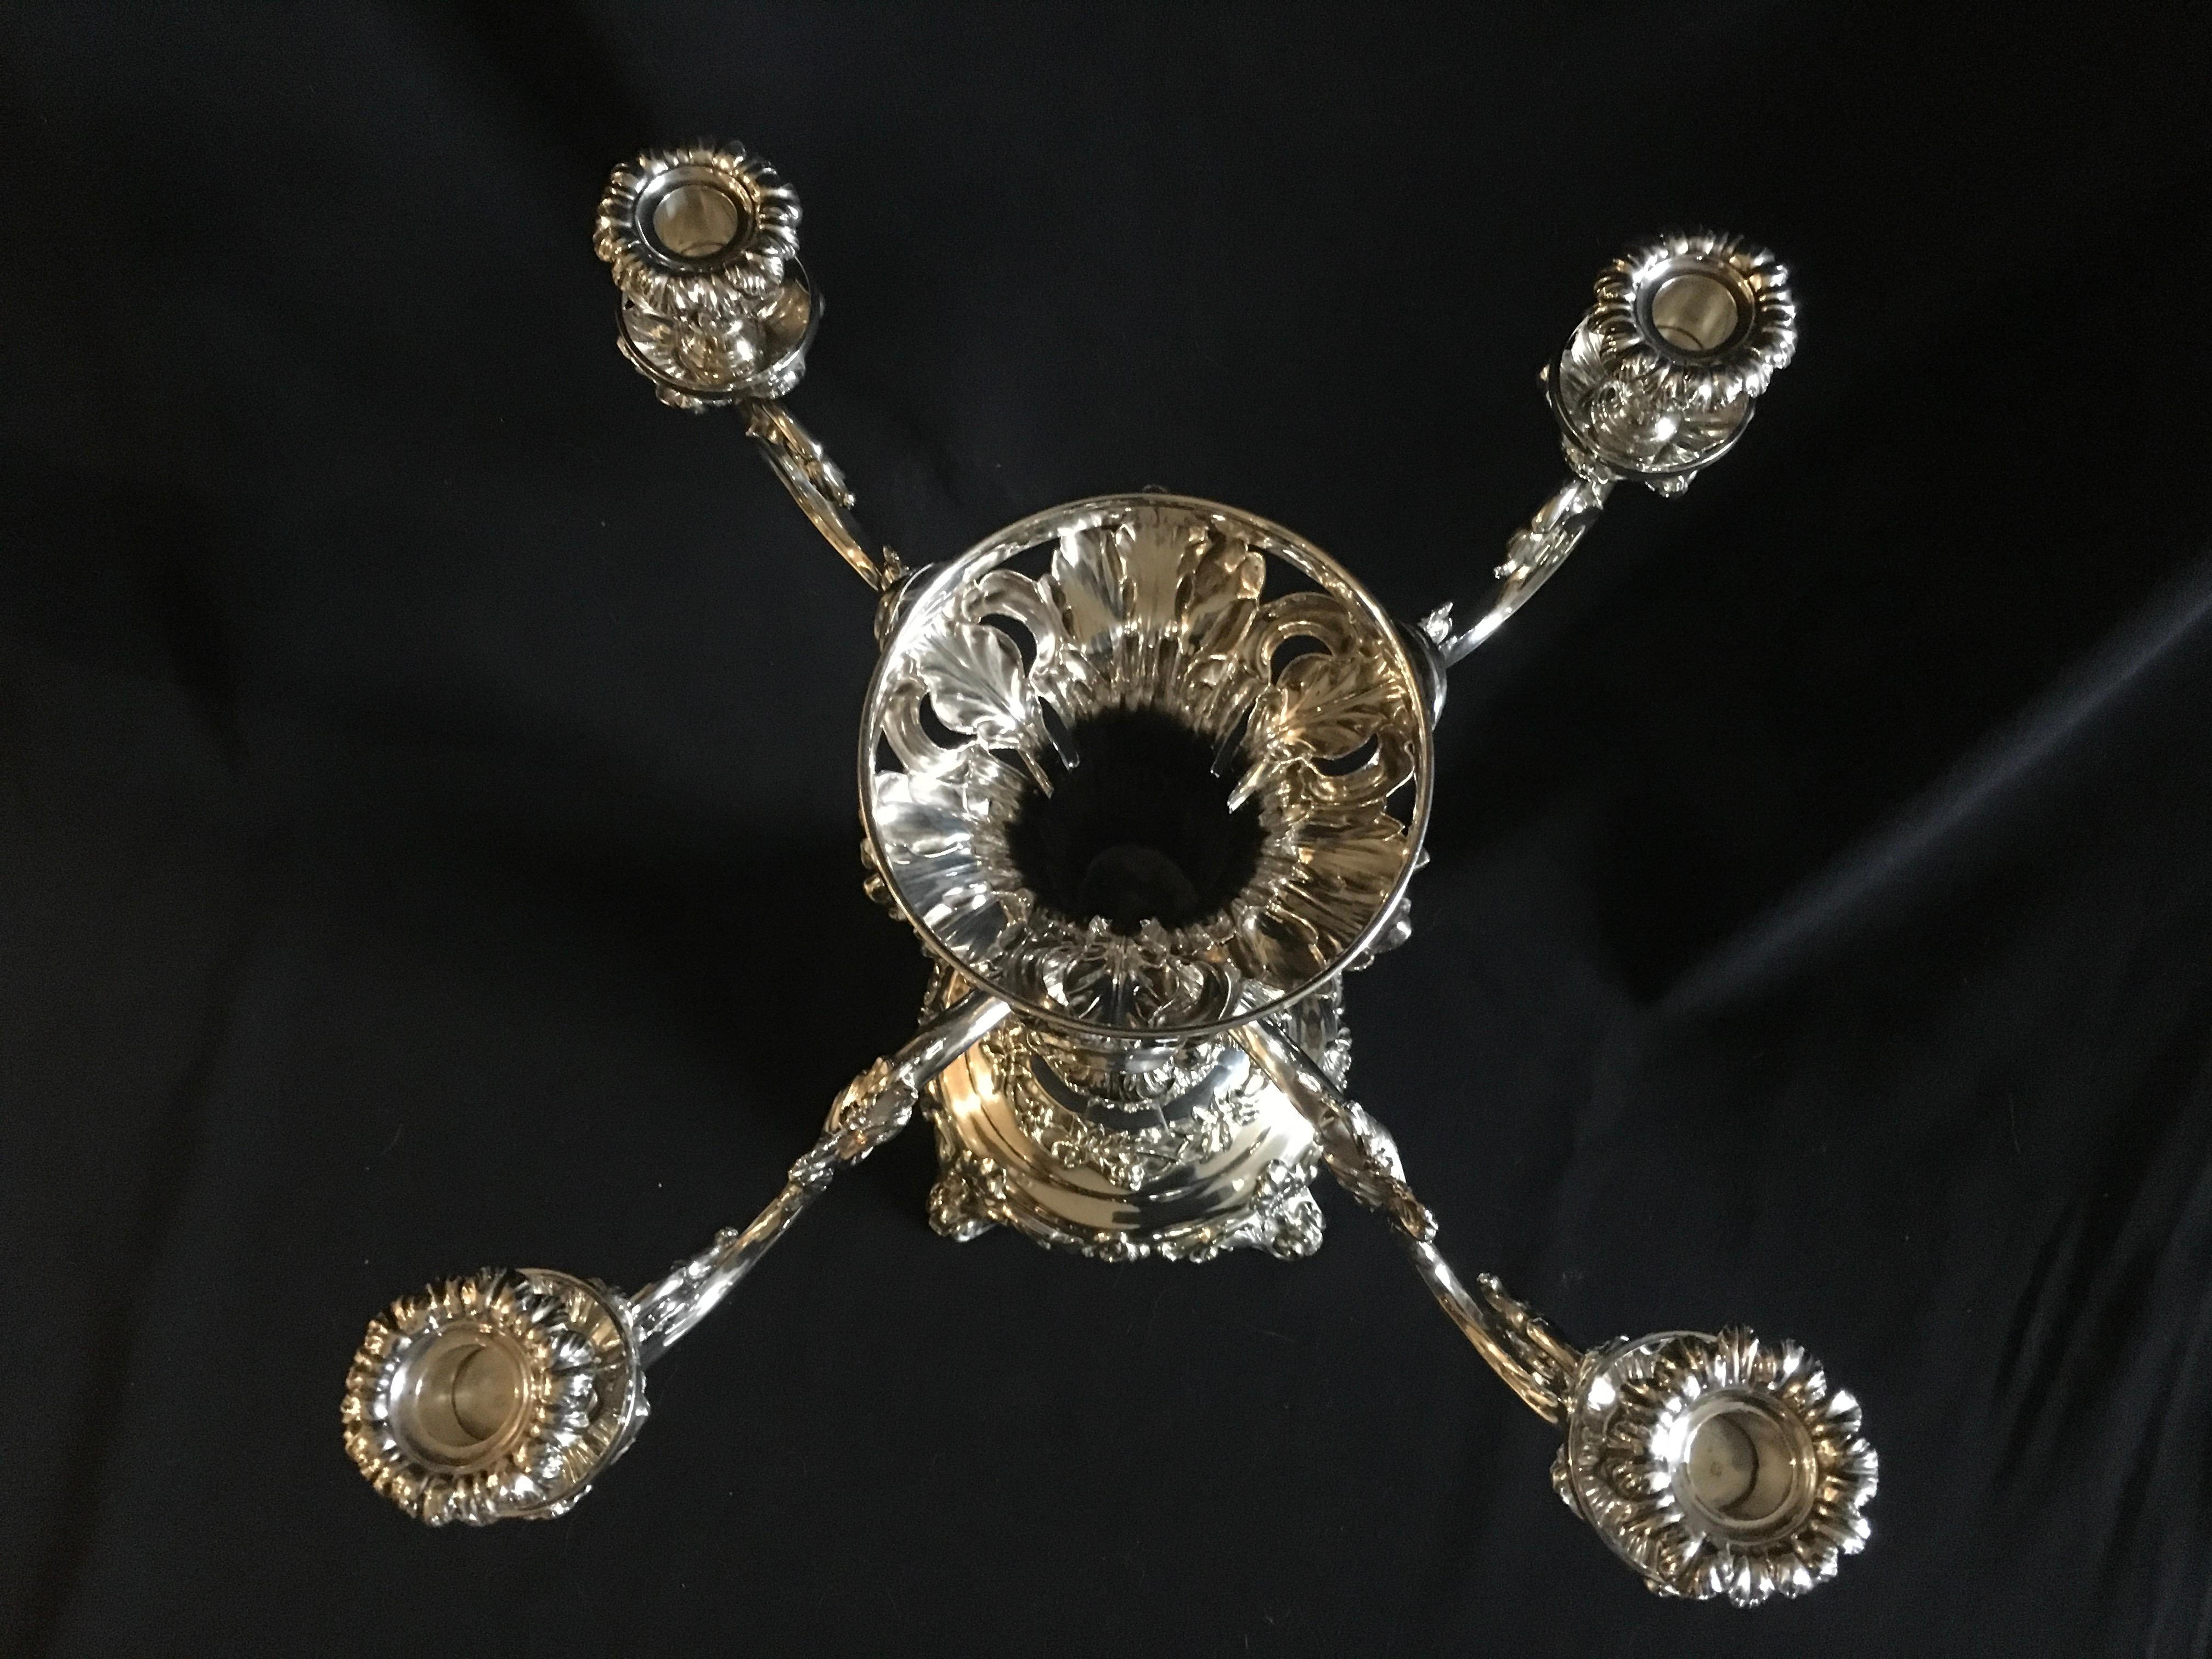 epergne silver